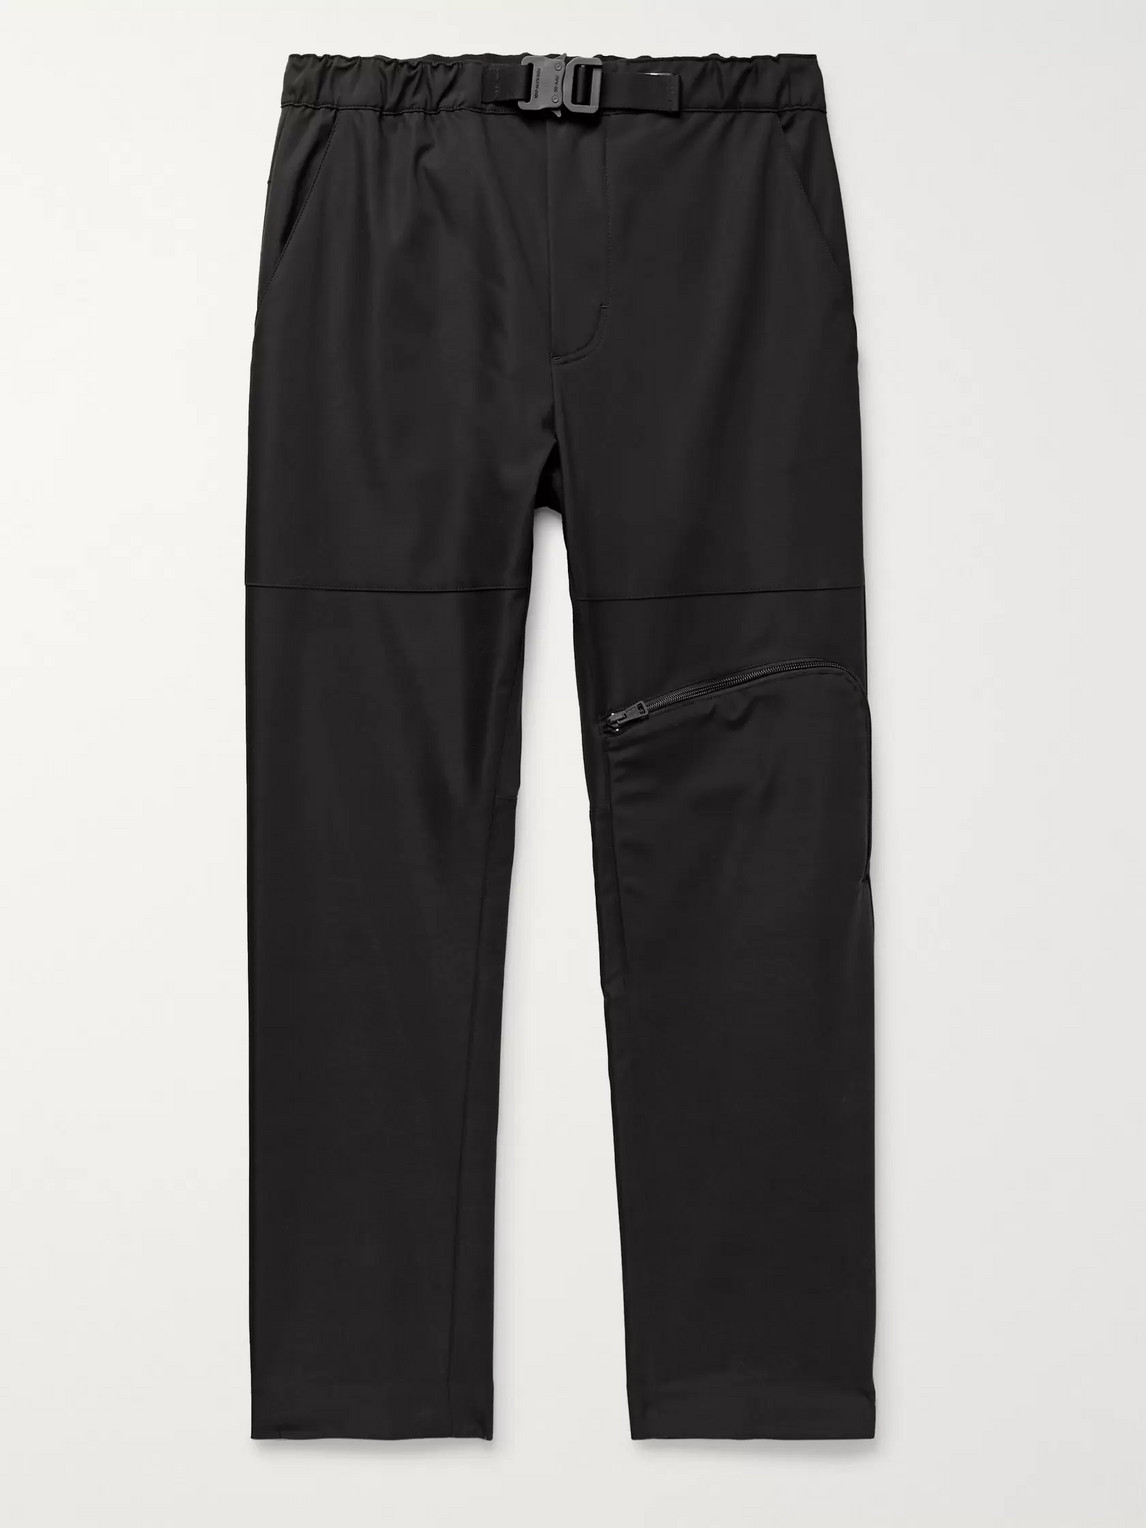 MONCLER GENIUS 6 MONCLER 1017 ALYX 9SM SLIM-FIT BELTED SHELL TROUSERS